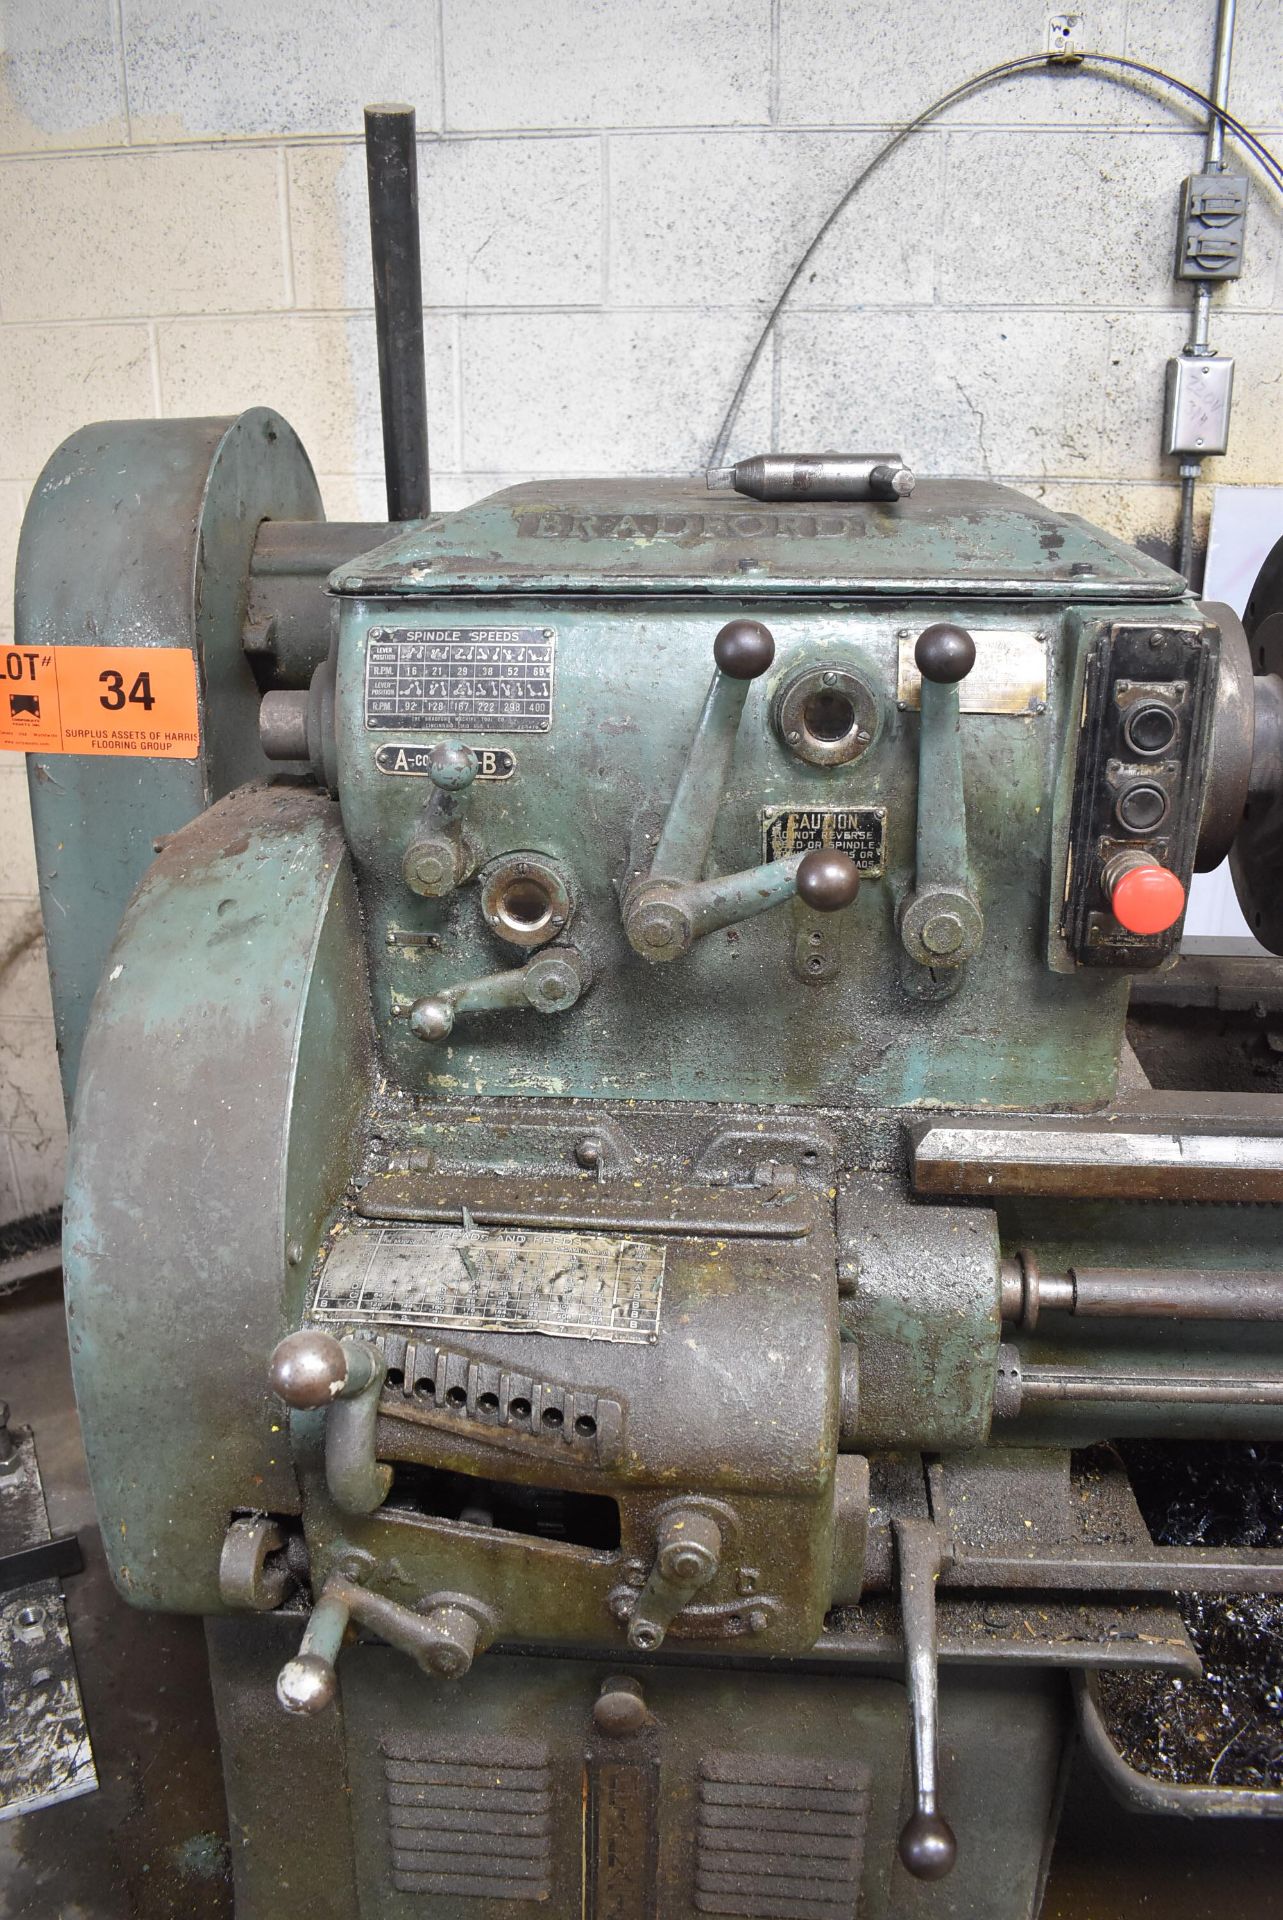 BRADFORD 18X100 ENGINE LATHE 18" SWING OVER BED, 100" DISTANCE BETWEEN CENTERS, 1.5" SPINDLE BORE, - Image 2 of 9